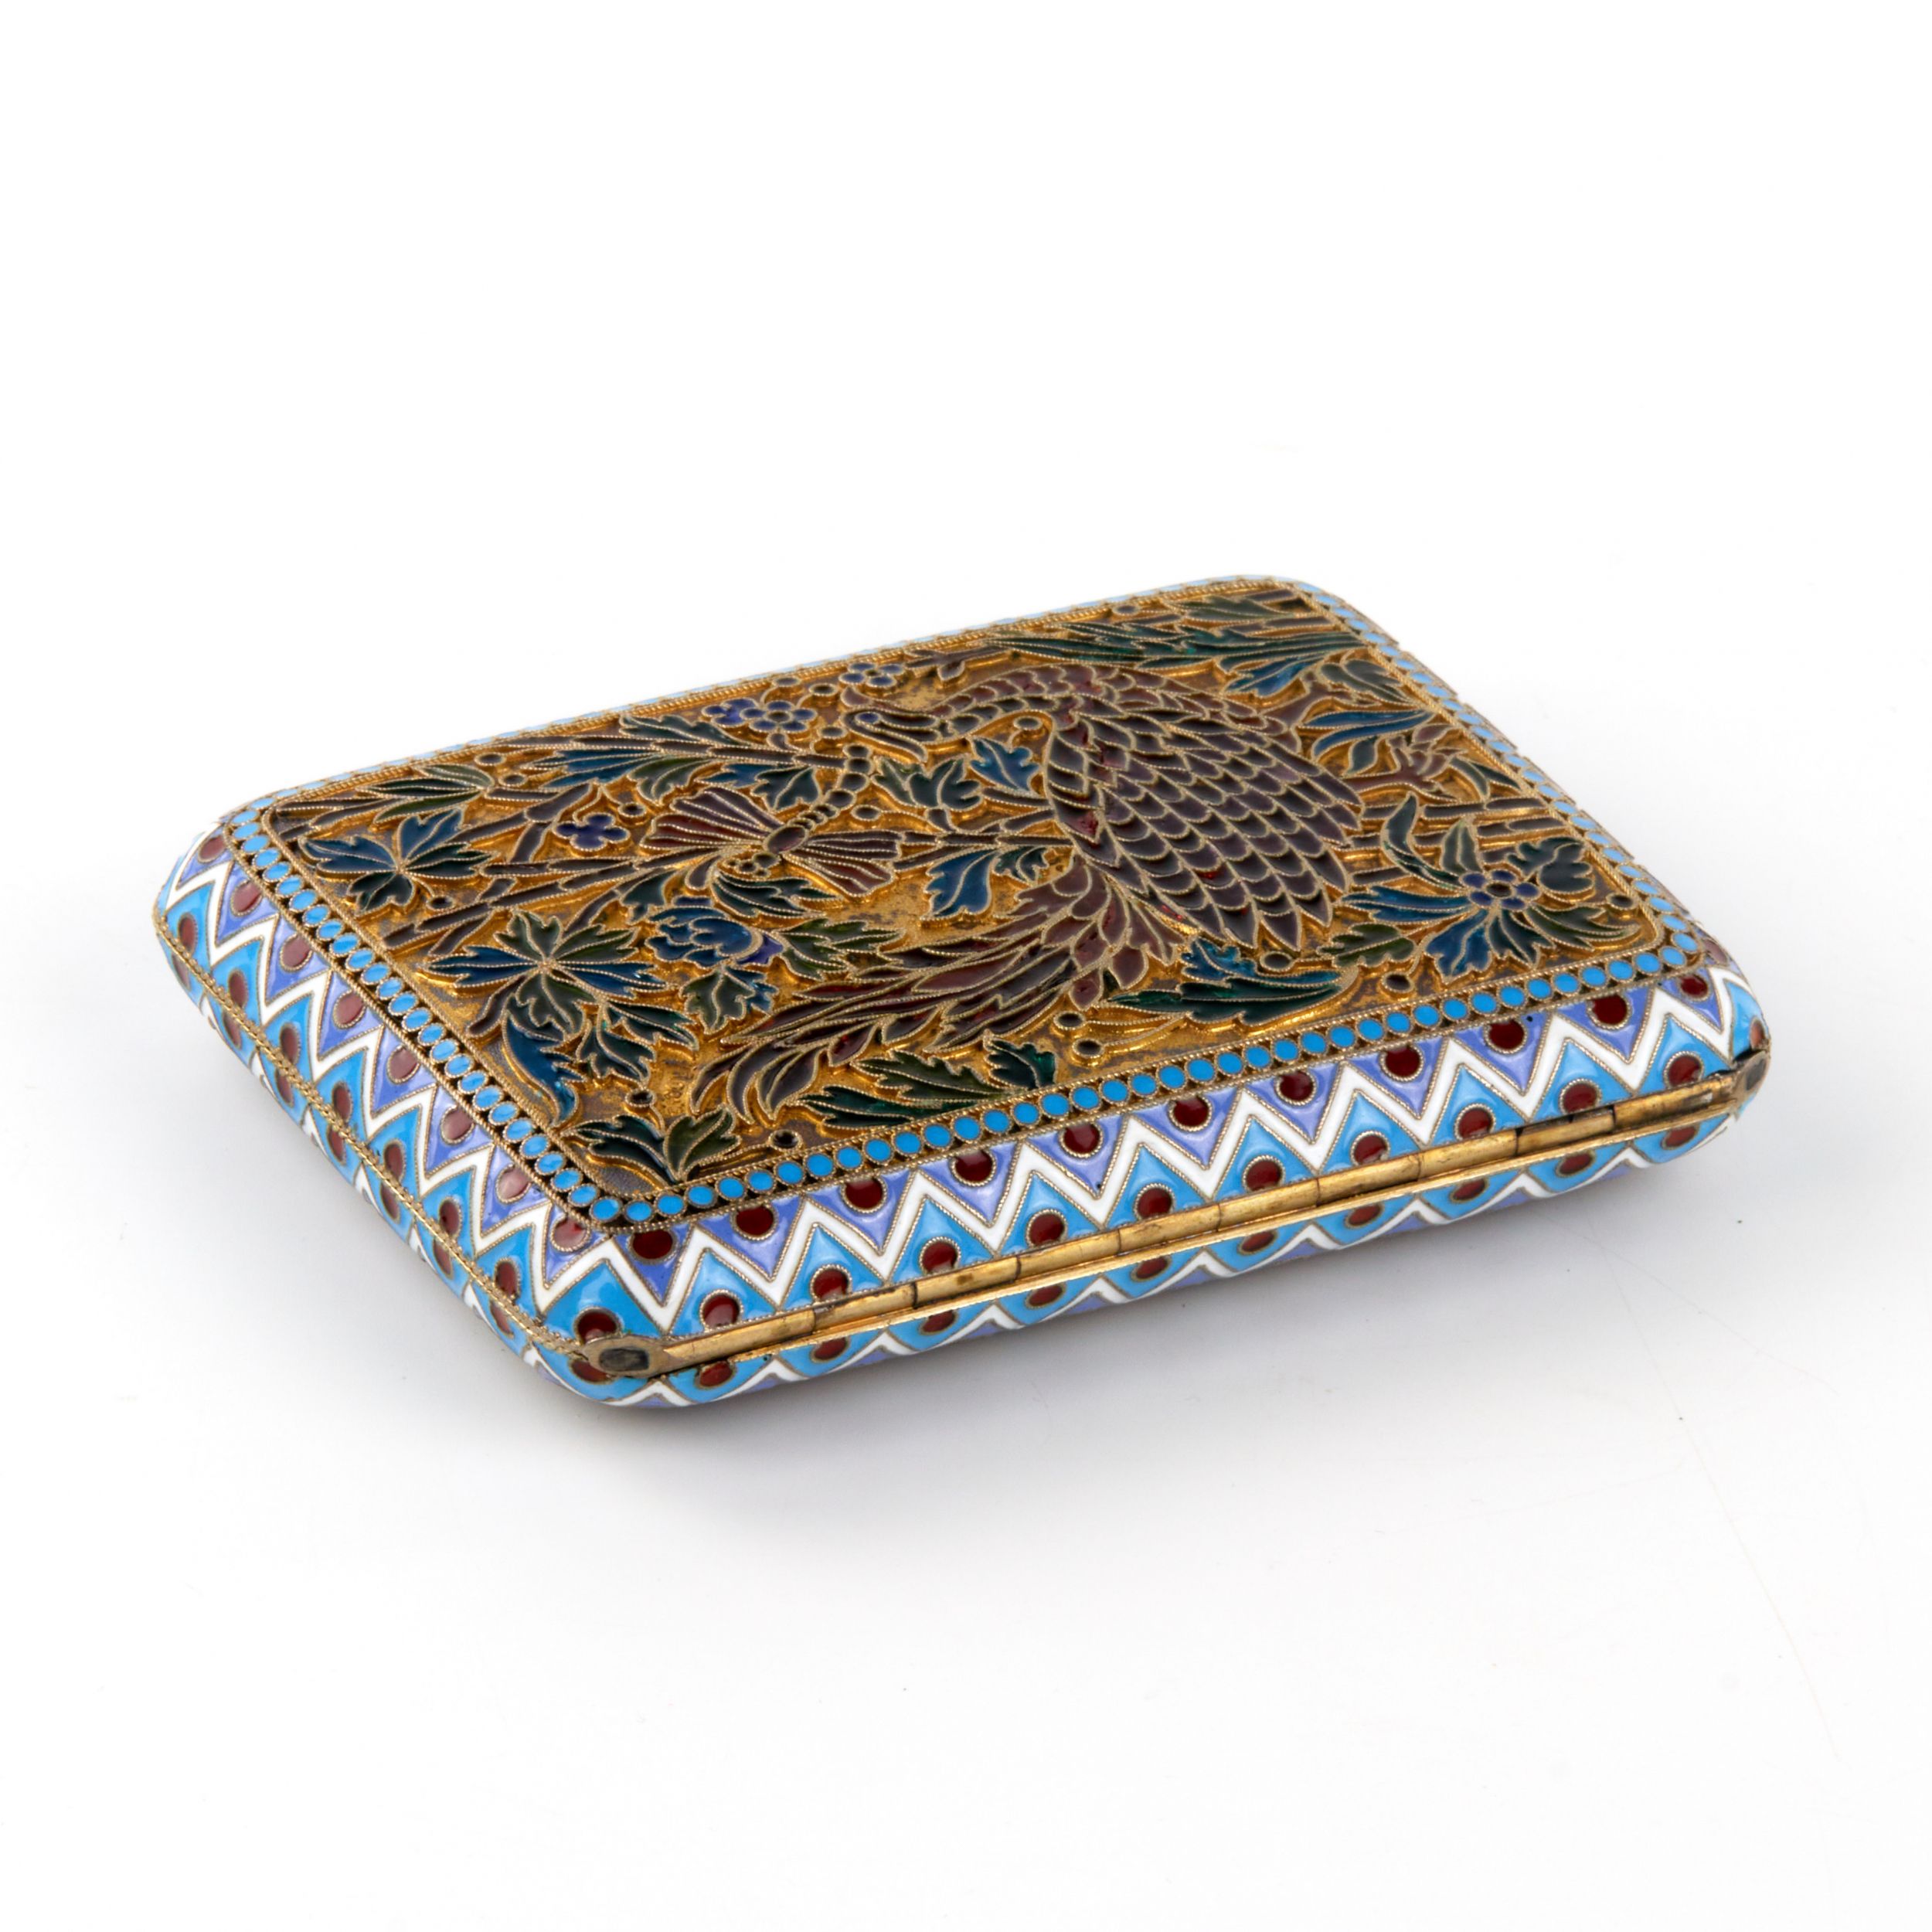 Silver cigarette case of Ovchinnikovs stained glass enamel. - Image 5 of 9